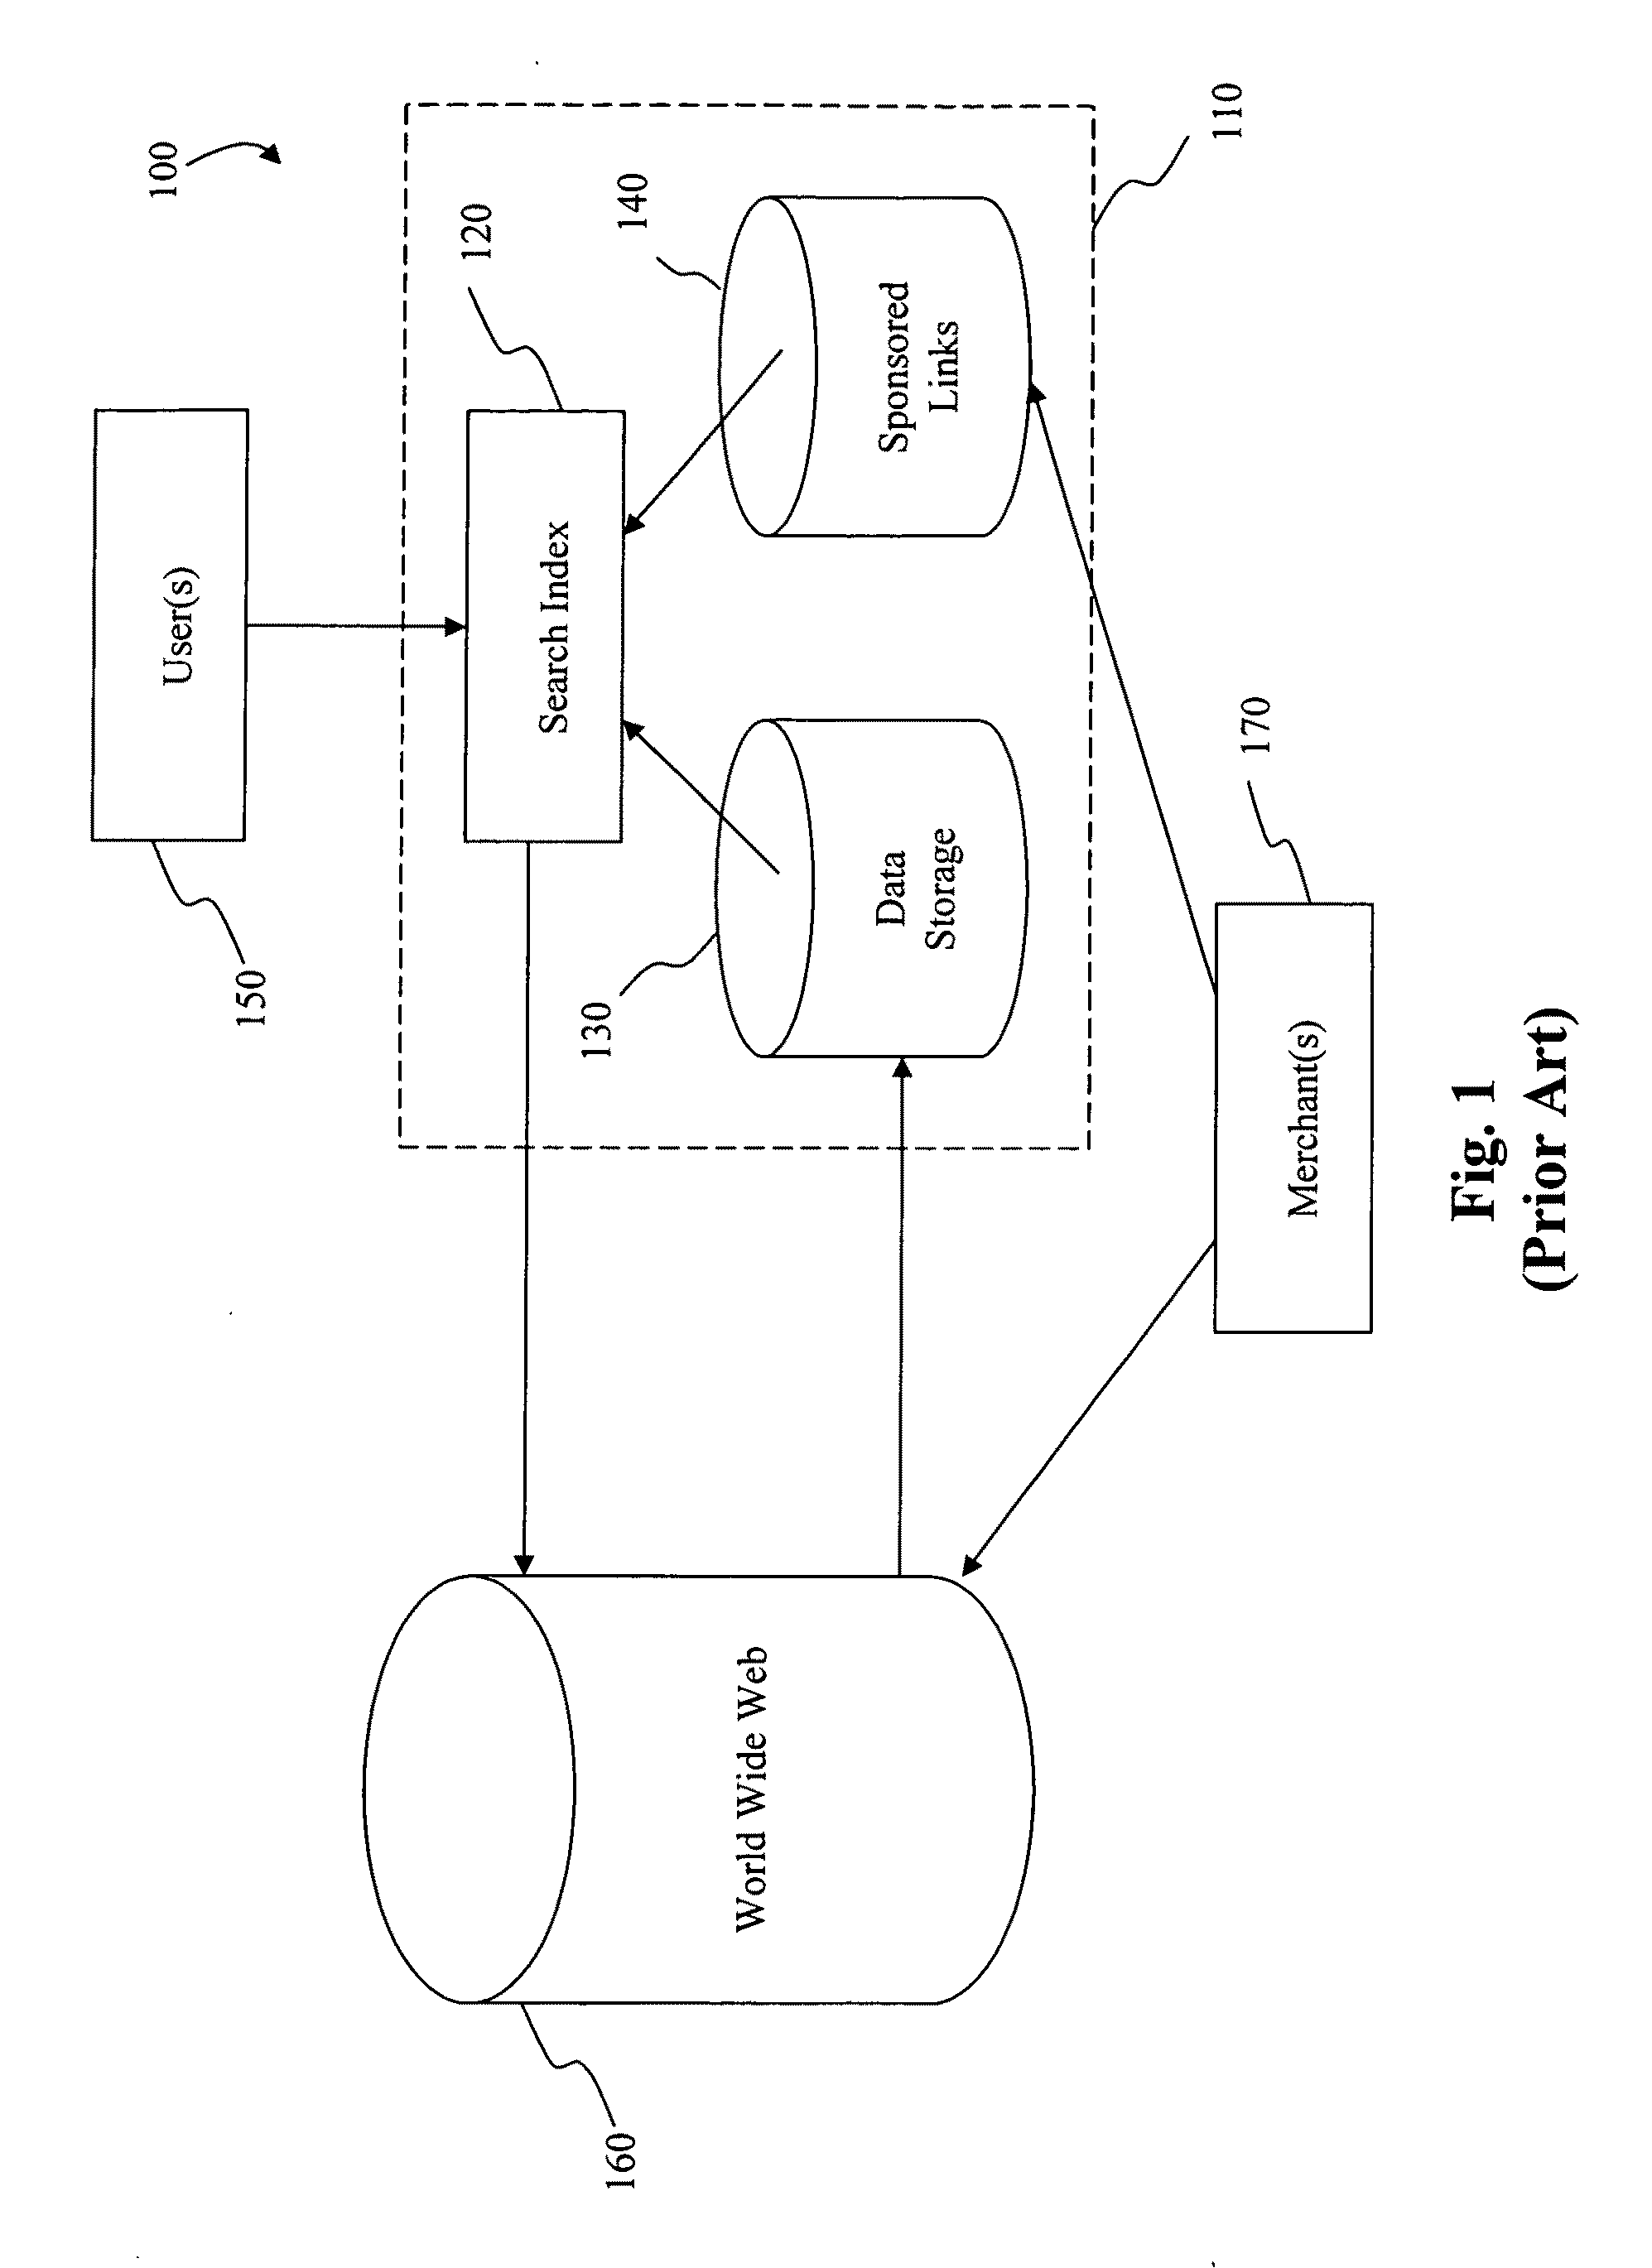 System and method for searching, identifying, and ranking merchants based upon preselected criteria such as social values